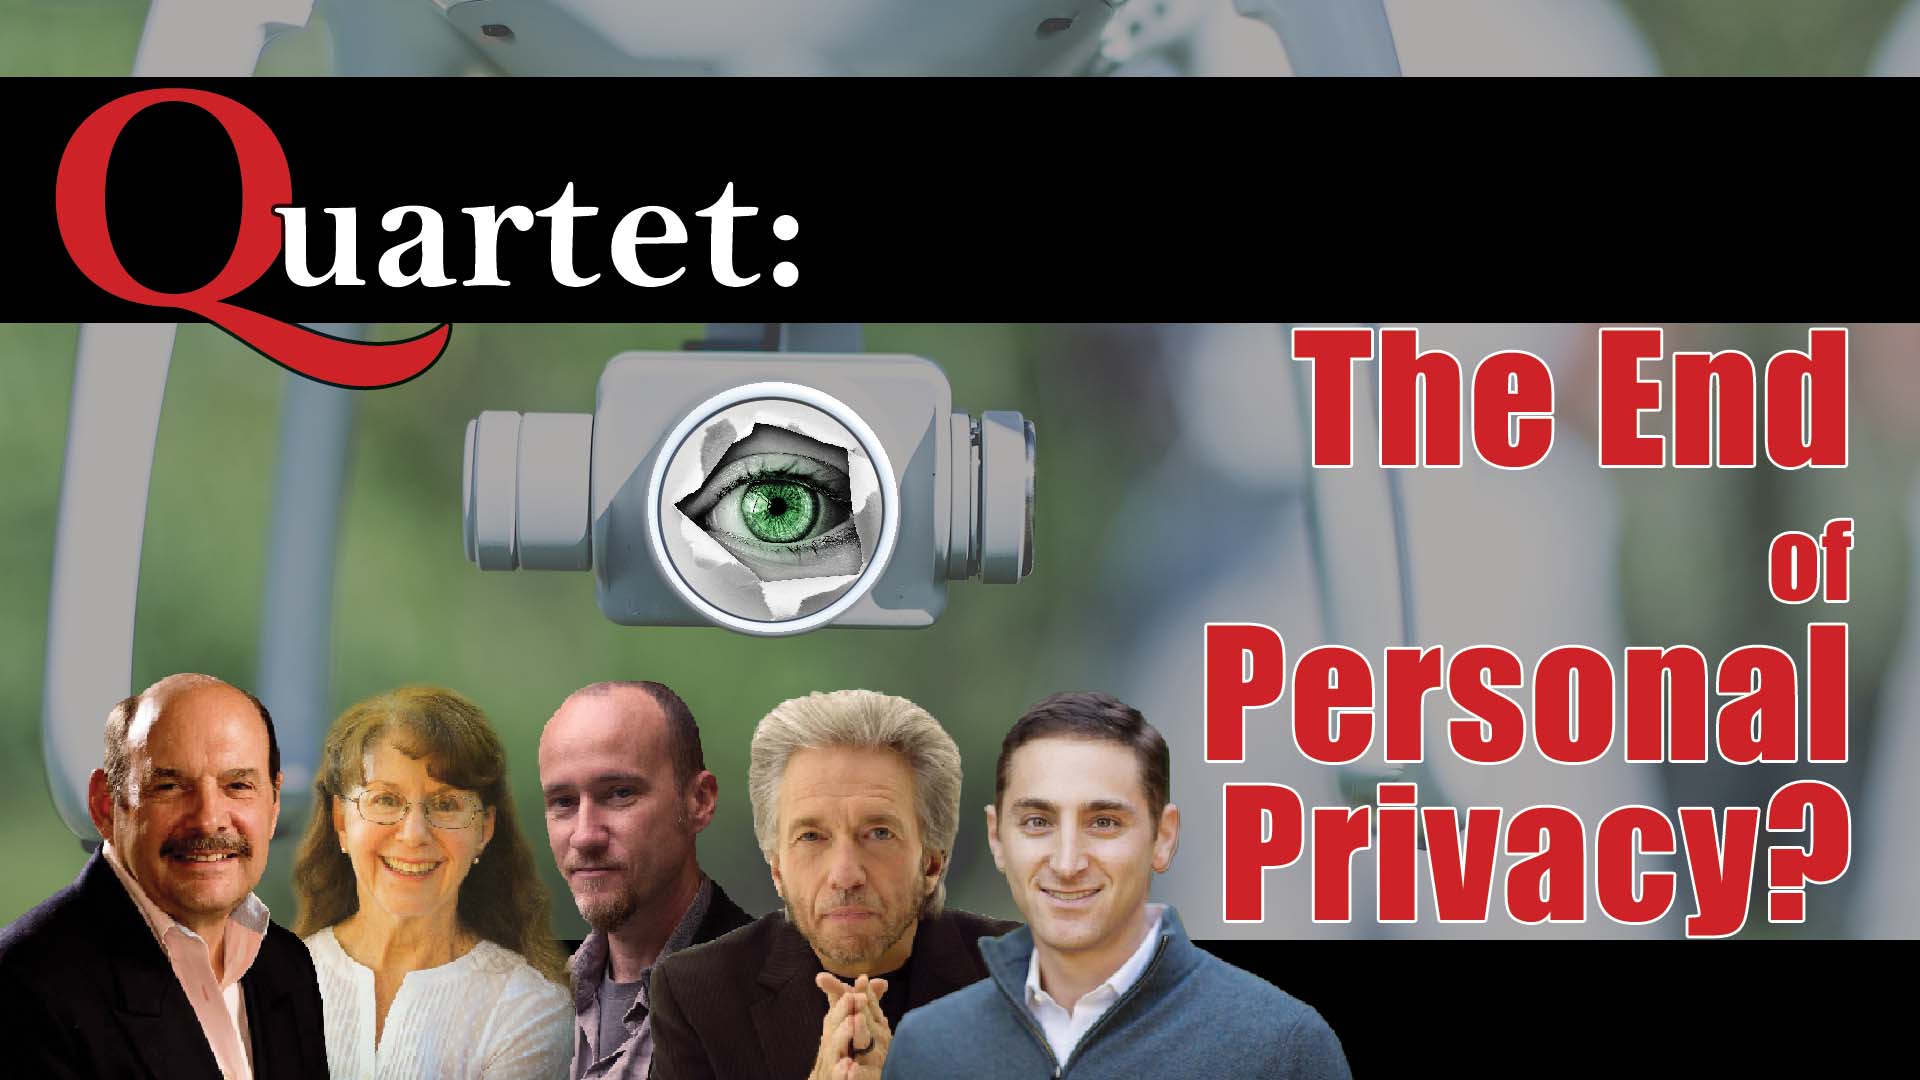 Quartet Premium - is this the end of personal privacy? with Gregg Braden, Penny Kelly, John Petersen, Kingsley Dennis